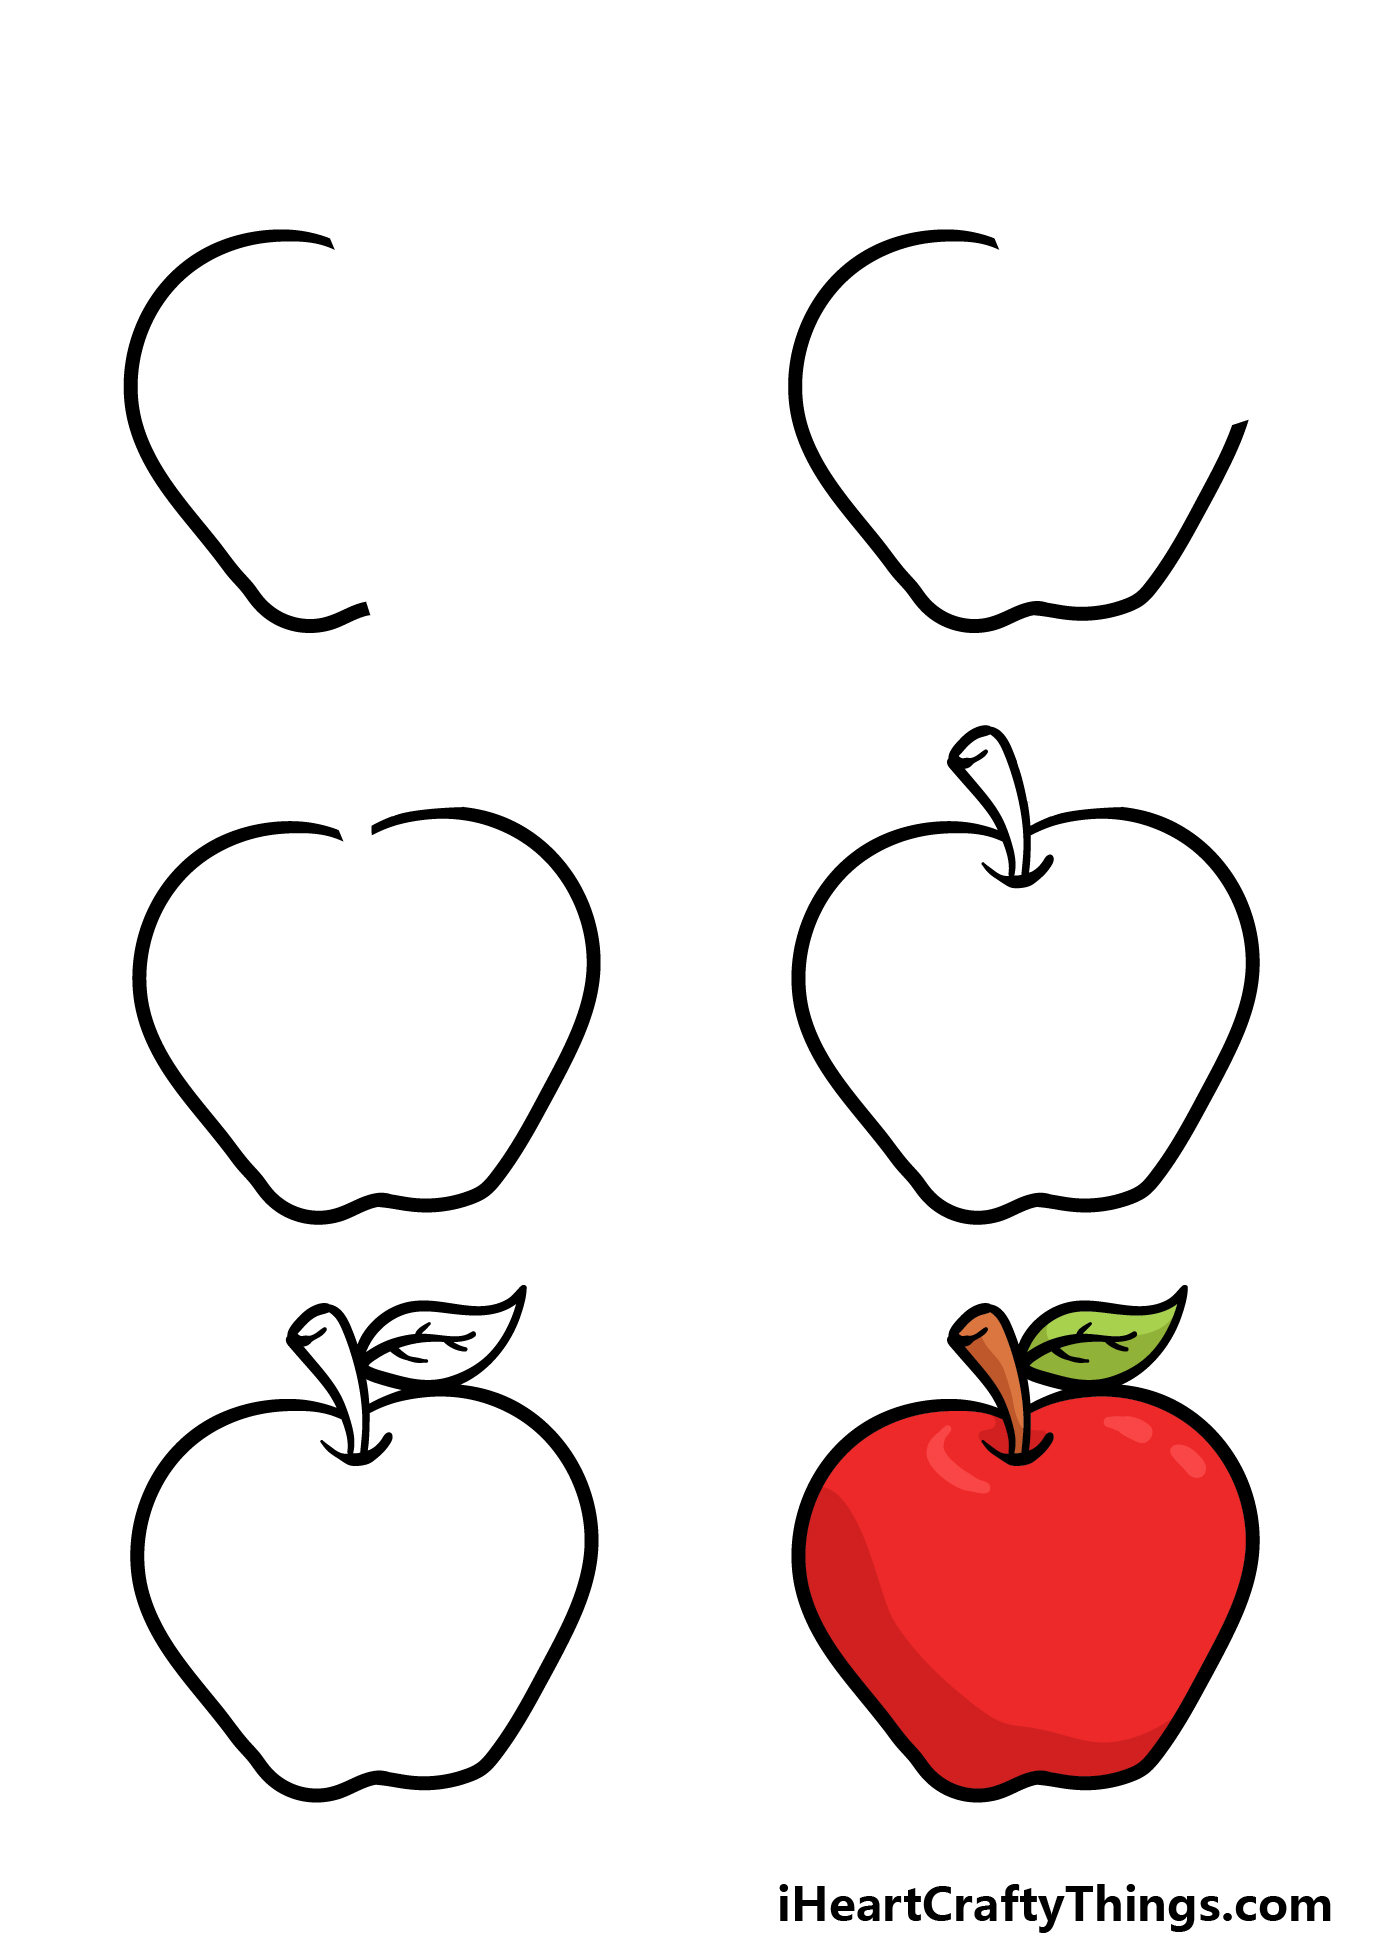 how to draw a Cartoon Apple in 6 steps